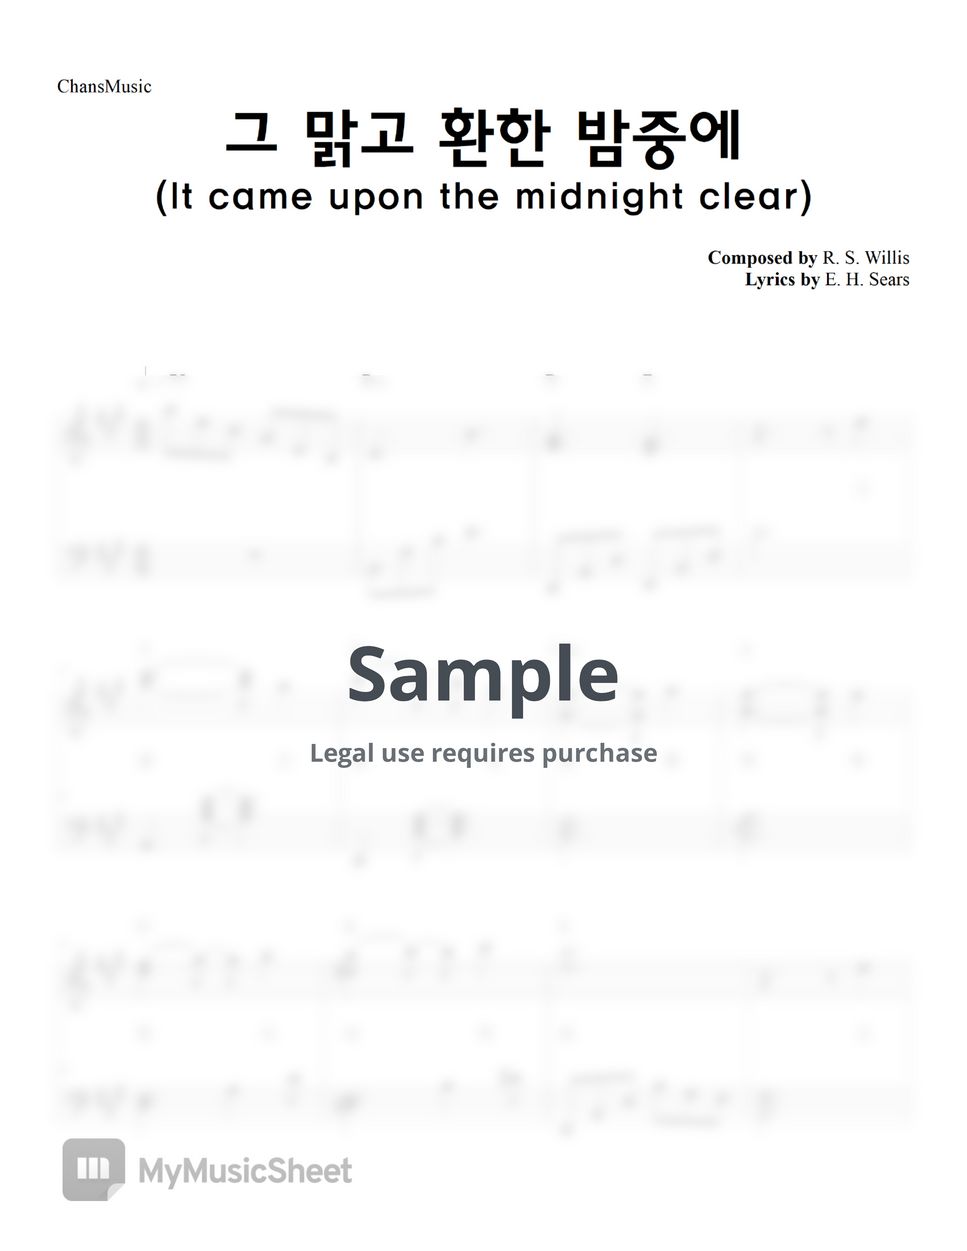 Hymn - It came upon the midnight clear (2절까지) by ChansMusic